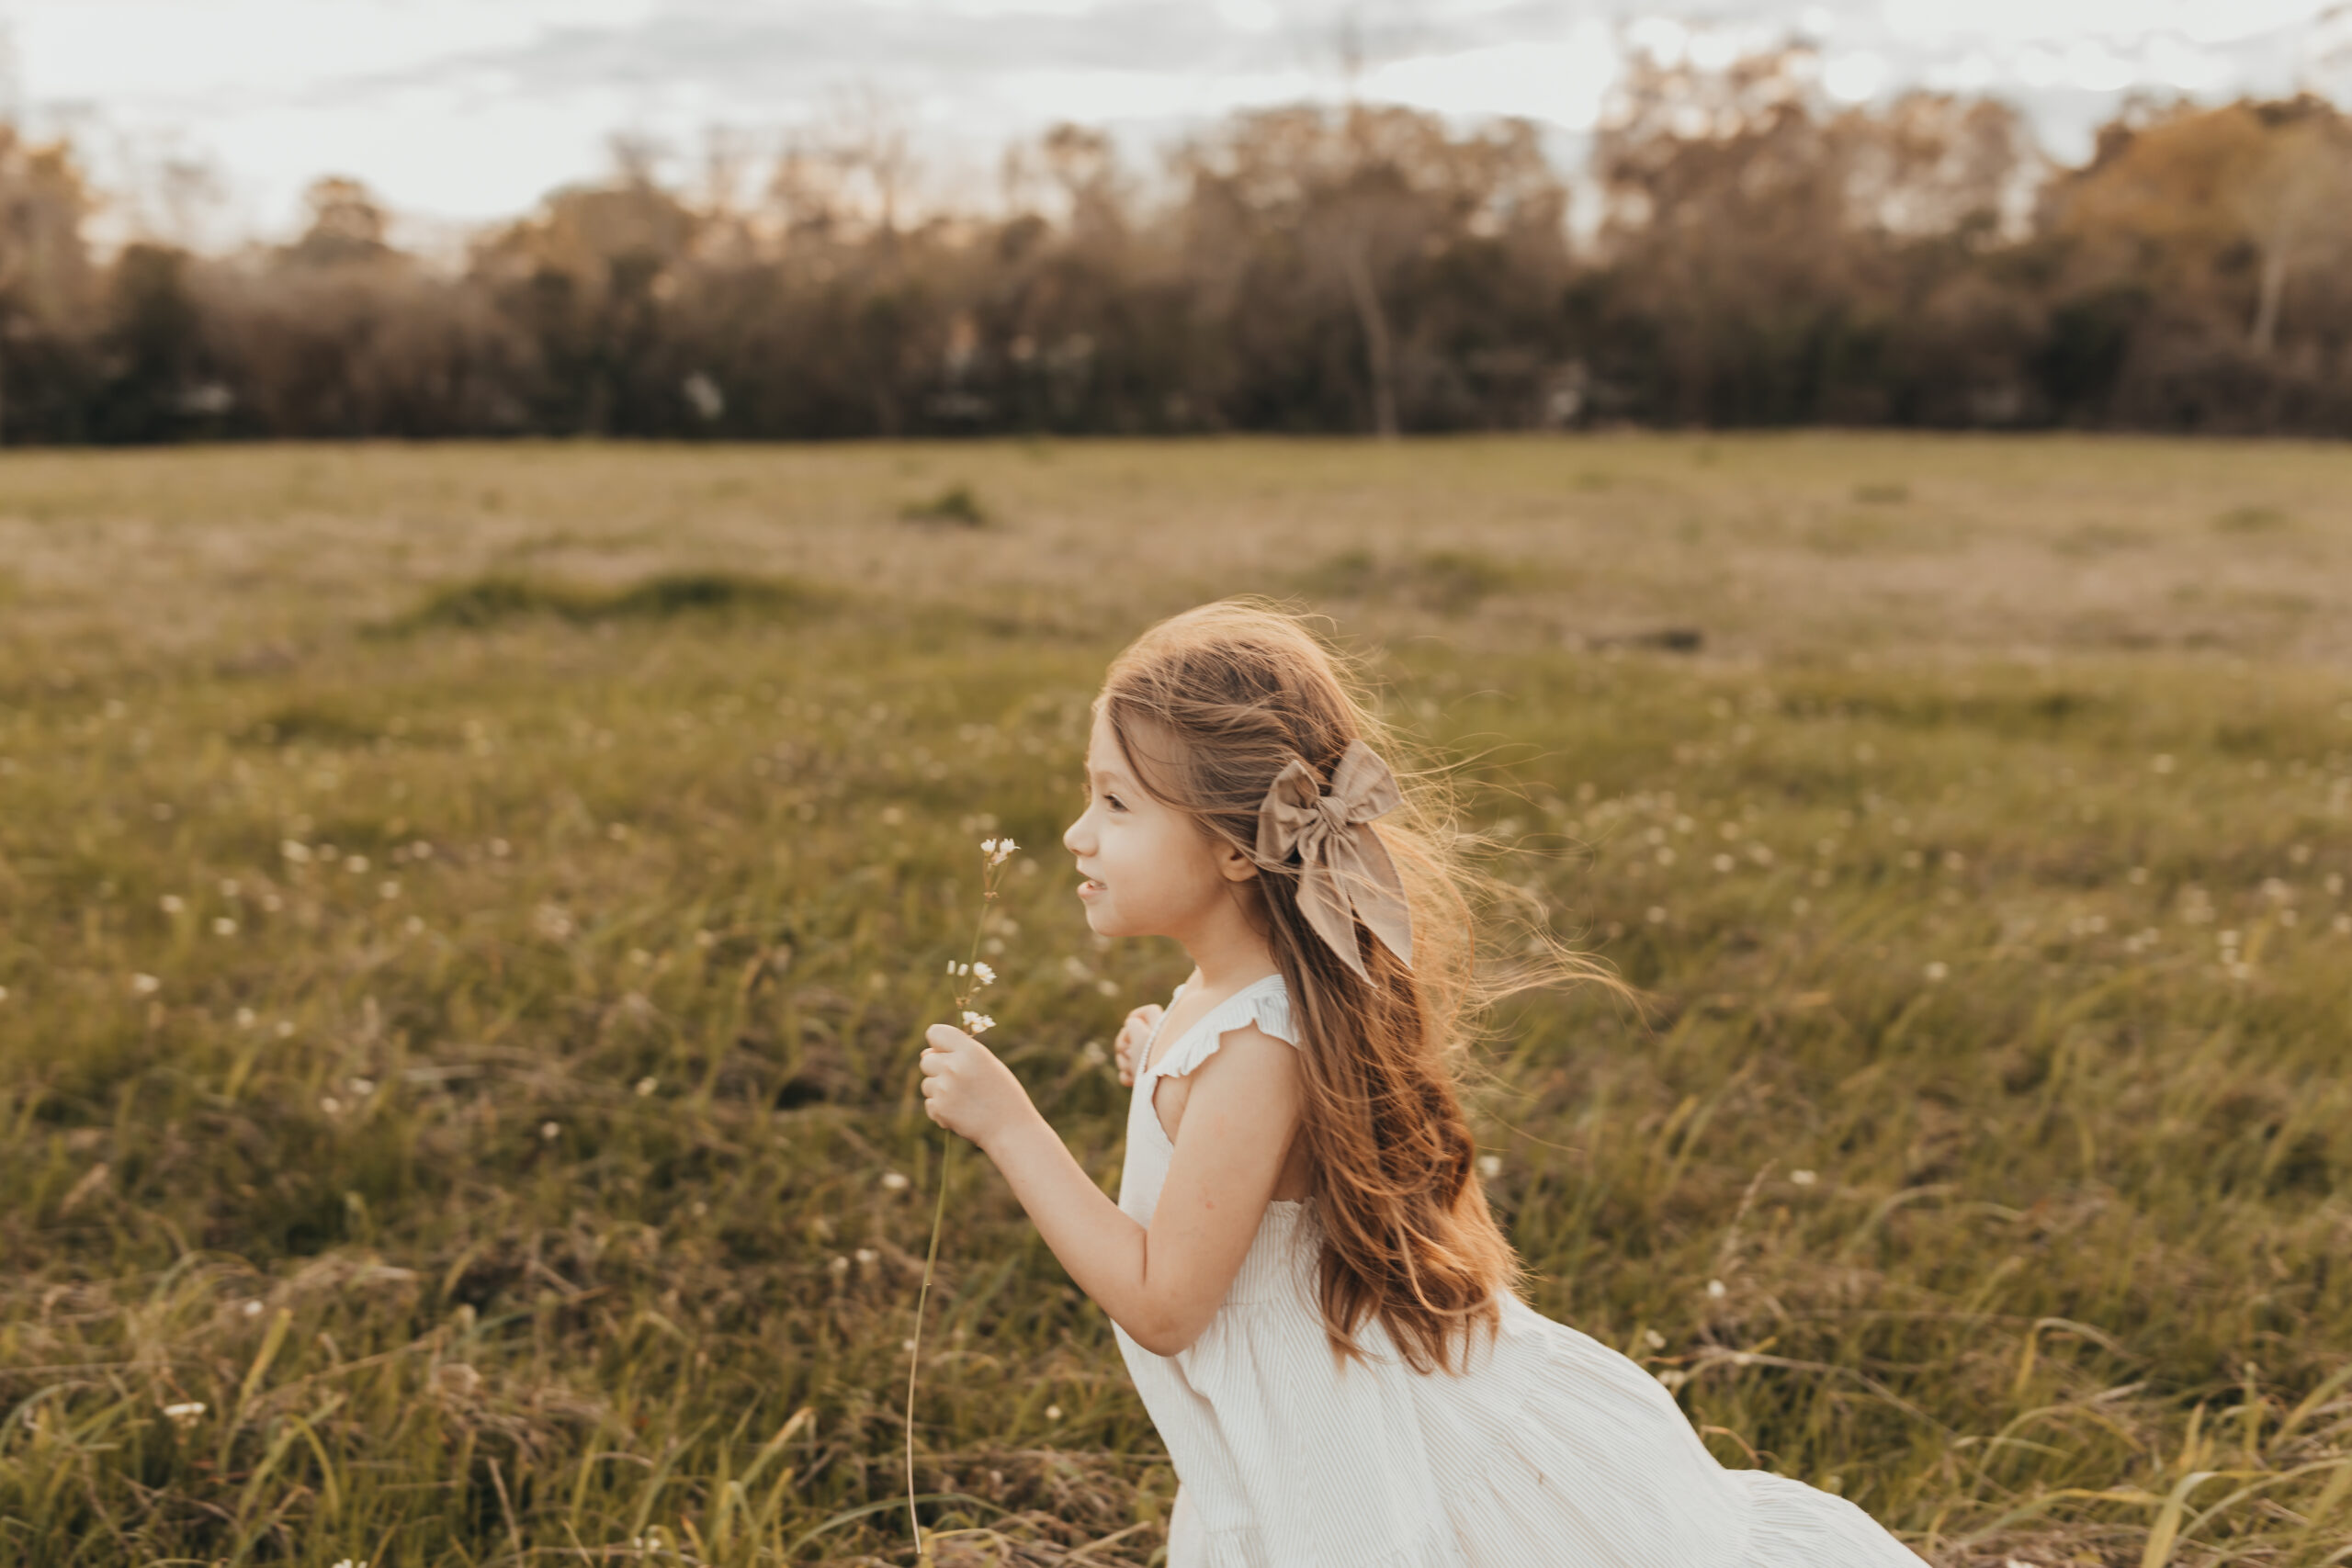 Little girl in field, smelling flowers, wearing clothing purchased from Houston Baby stores.